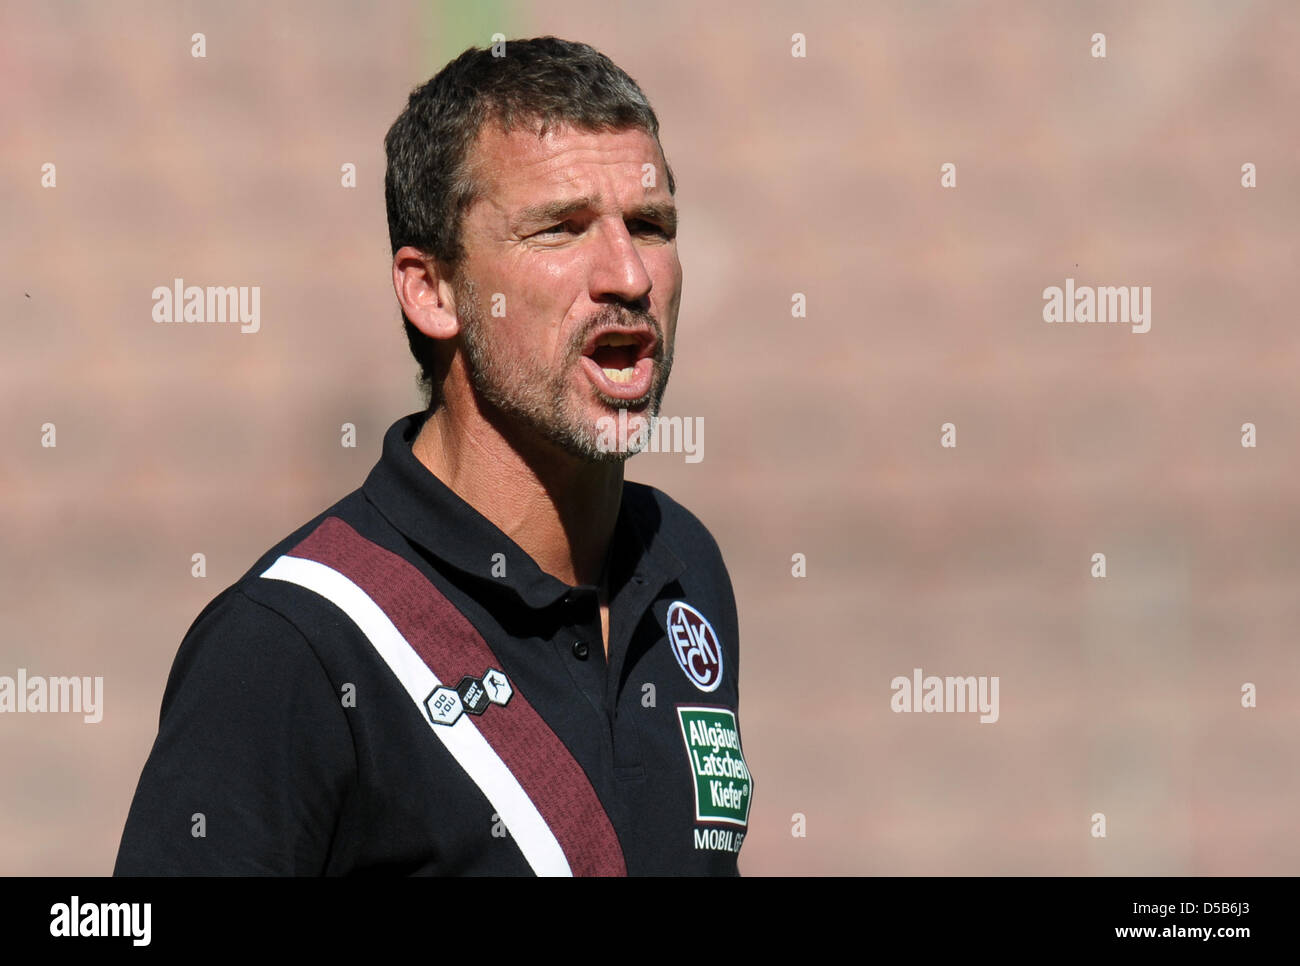 Kaiserslautern coach Marco Kurz calls out to his players from the sidelines during a test match against FC Aberdeen in Kaiserslautern, Germany, 07 August 2010. Kaiserslautern won the match 2-0. Photo: Ronald Wittek Stock Photo